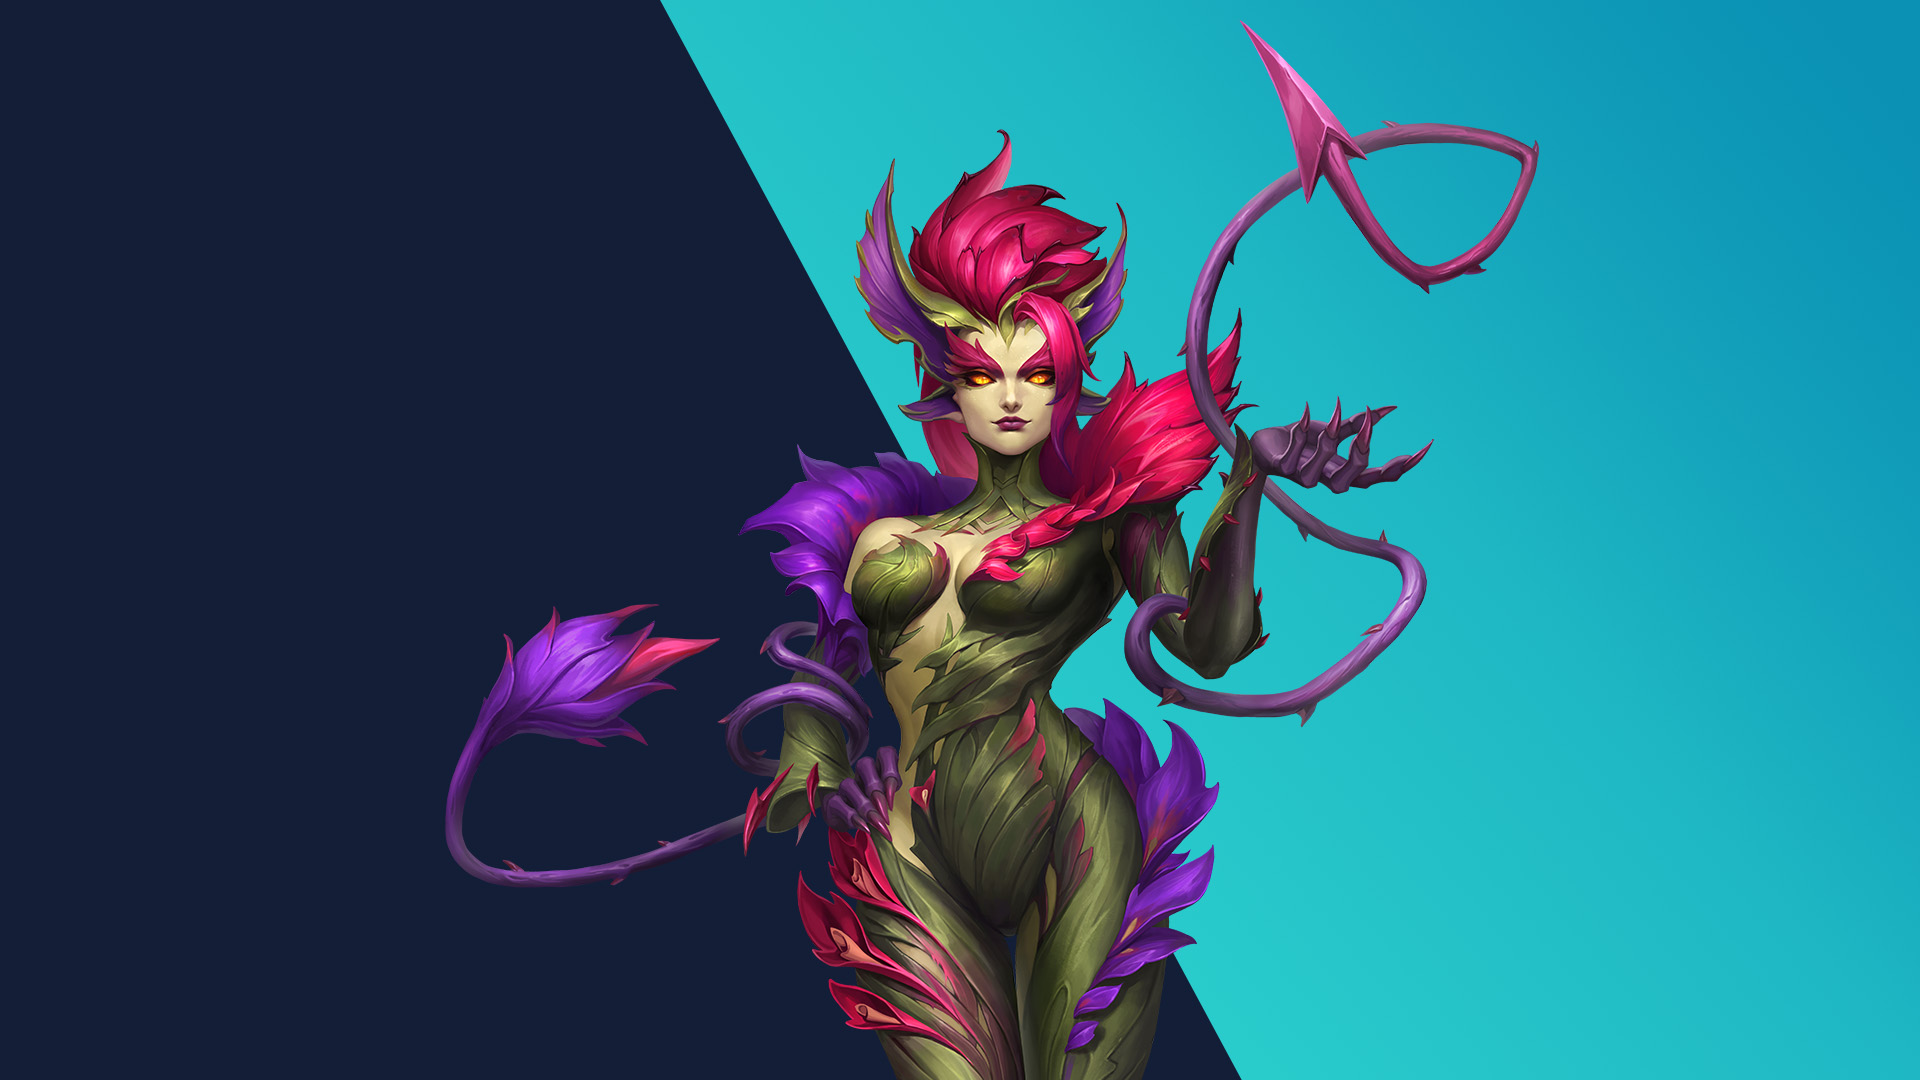 Wild Rift Patch Notes 4.4C: Zyra Release, ARURF Mode, Champion Adjustments, and More!